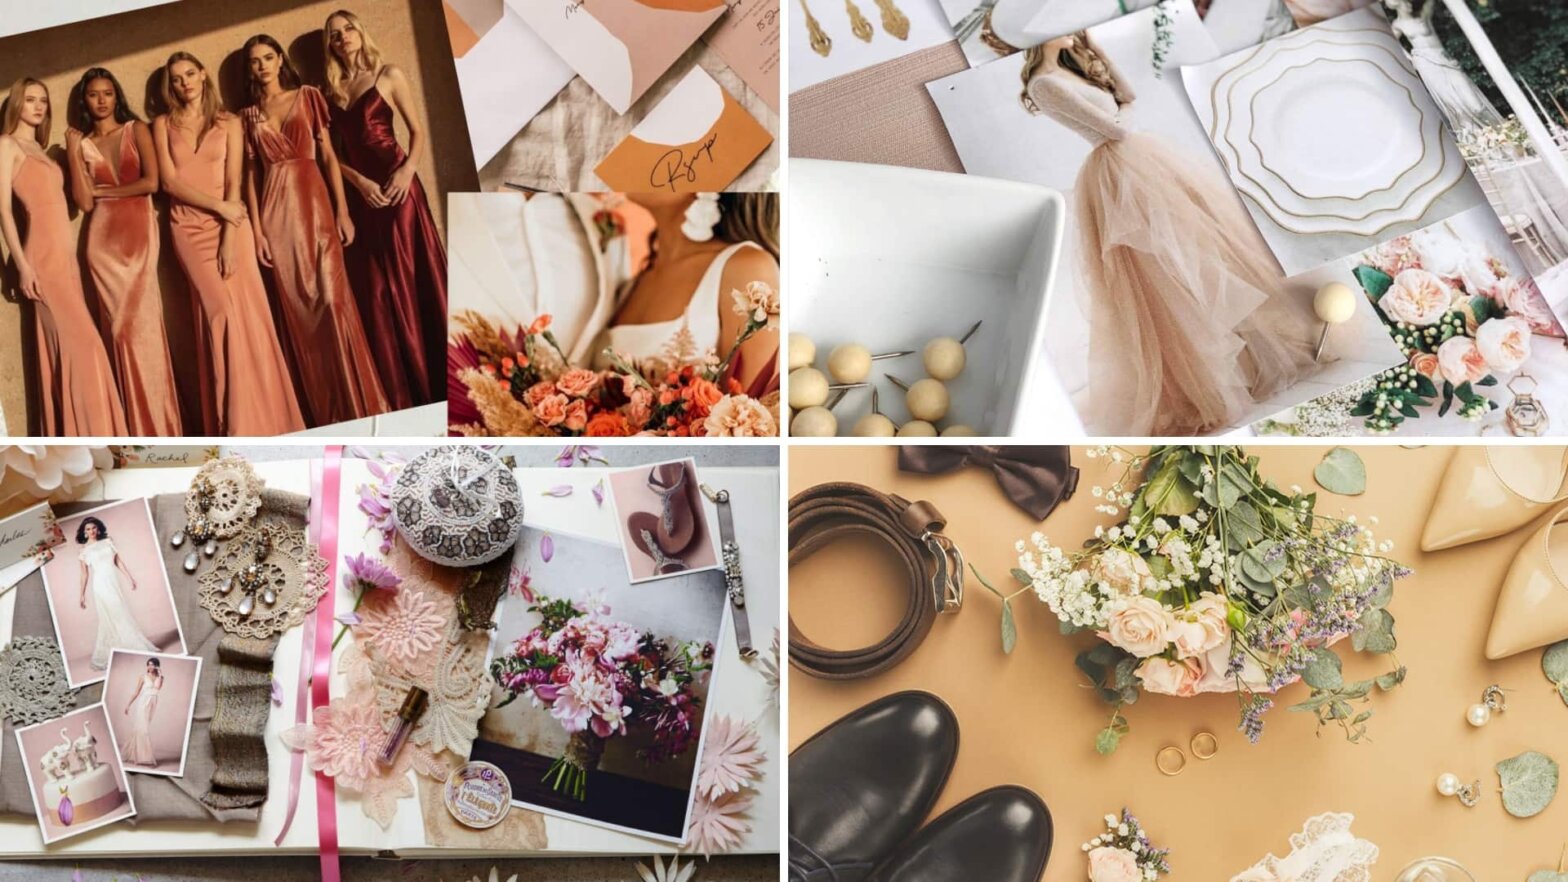 How to Make a Wedding Mood Board Styles Themes and Colors Featured